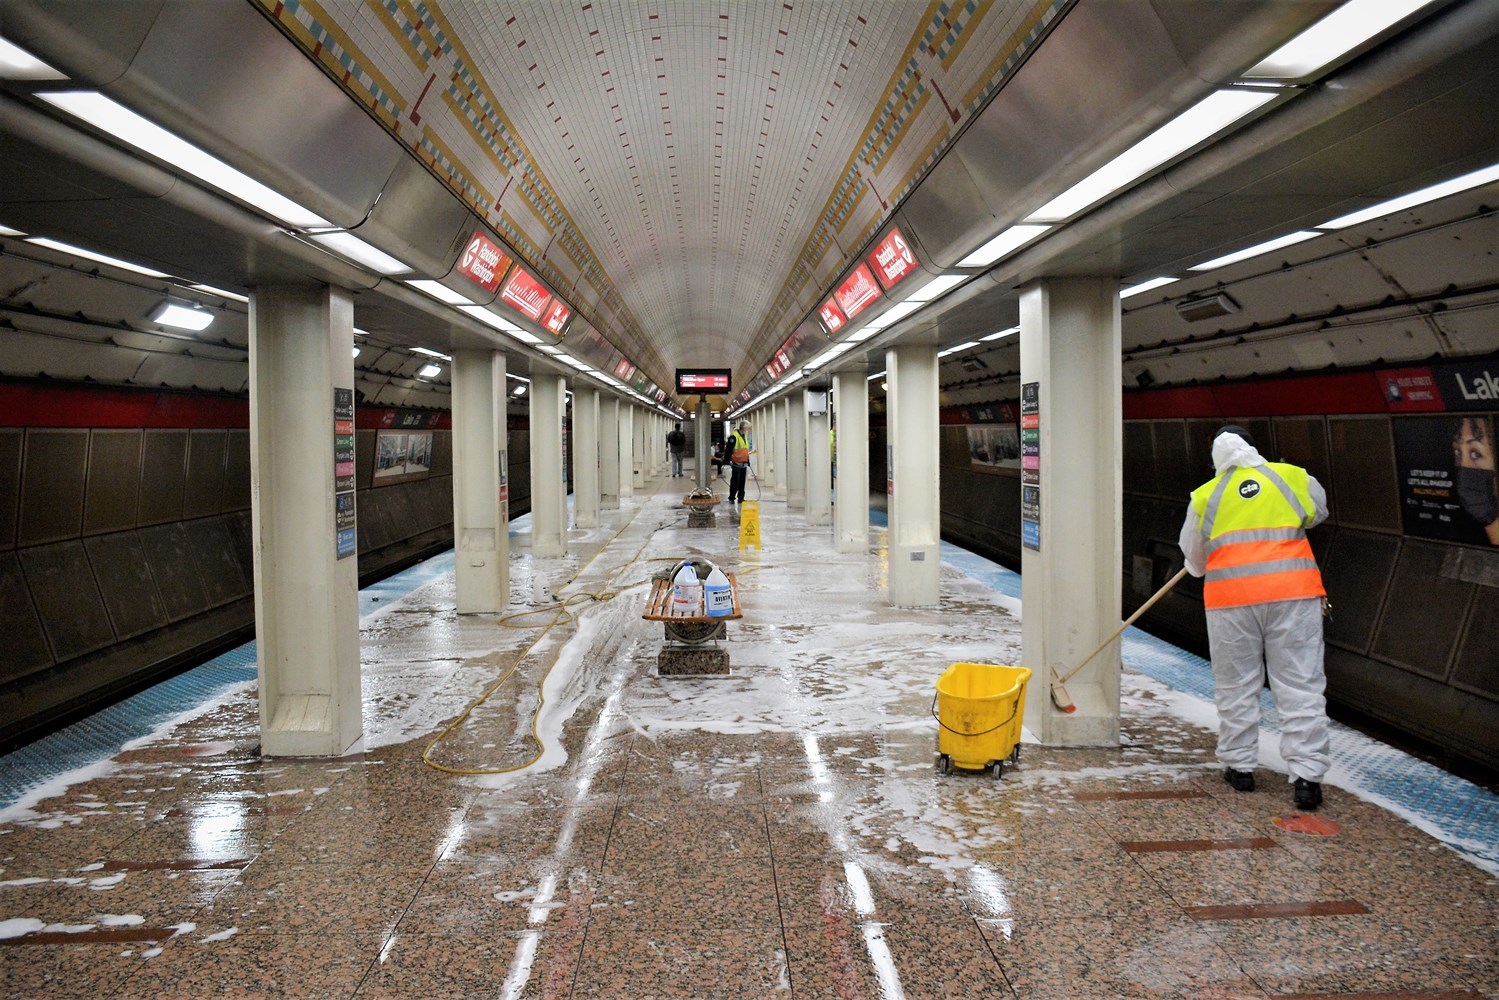 Crews performing a deep clean of a subway station